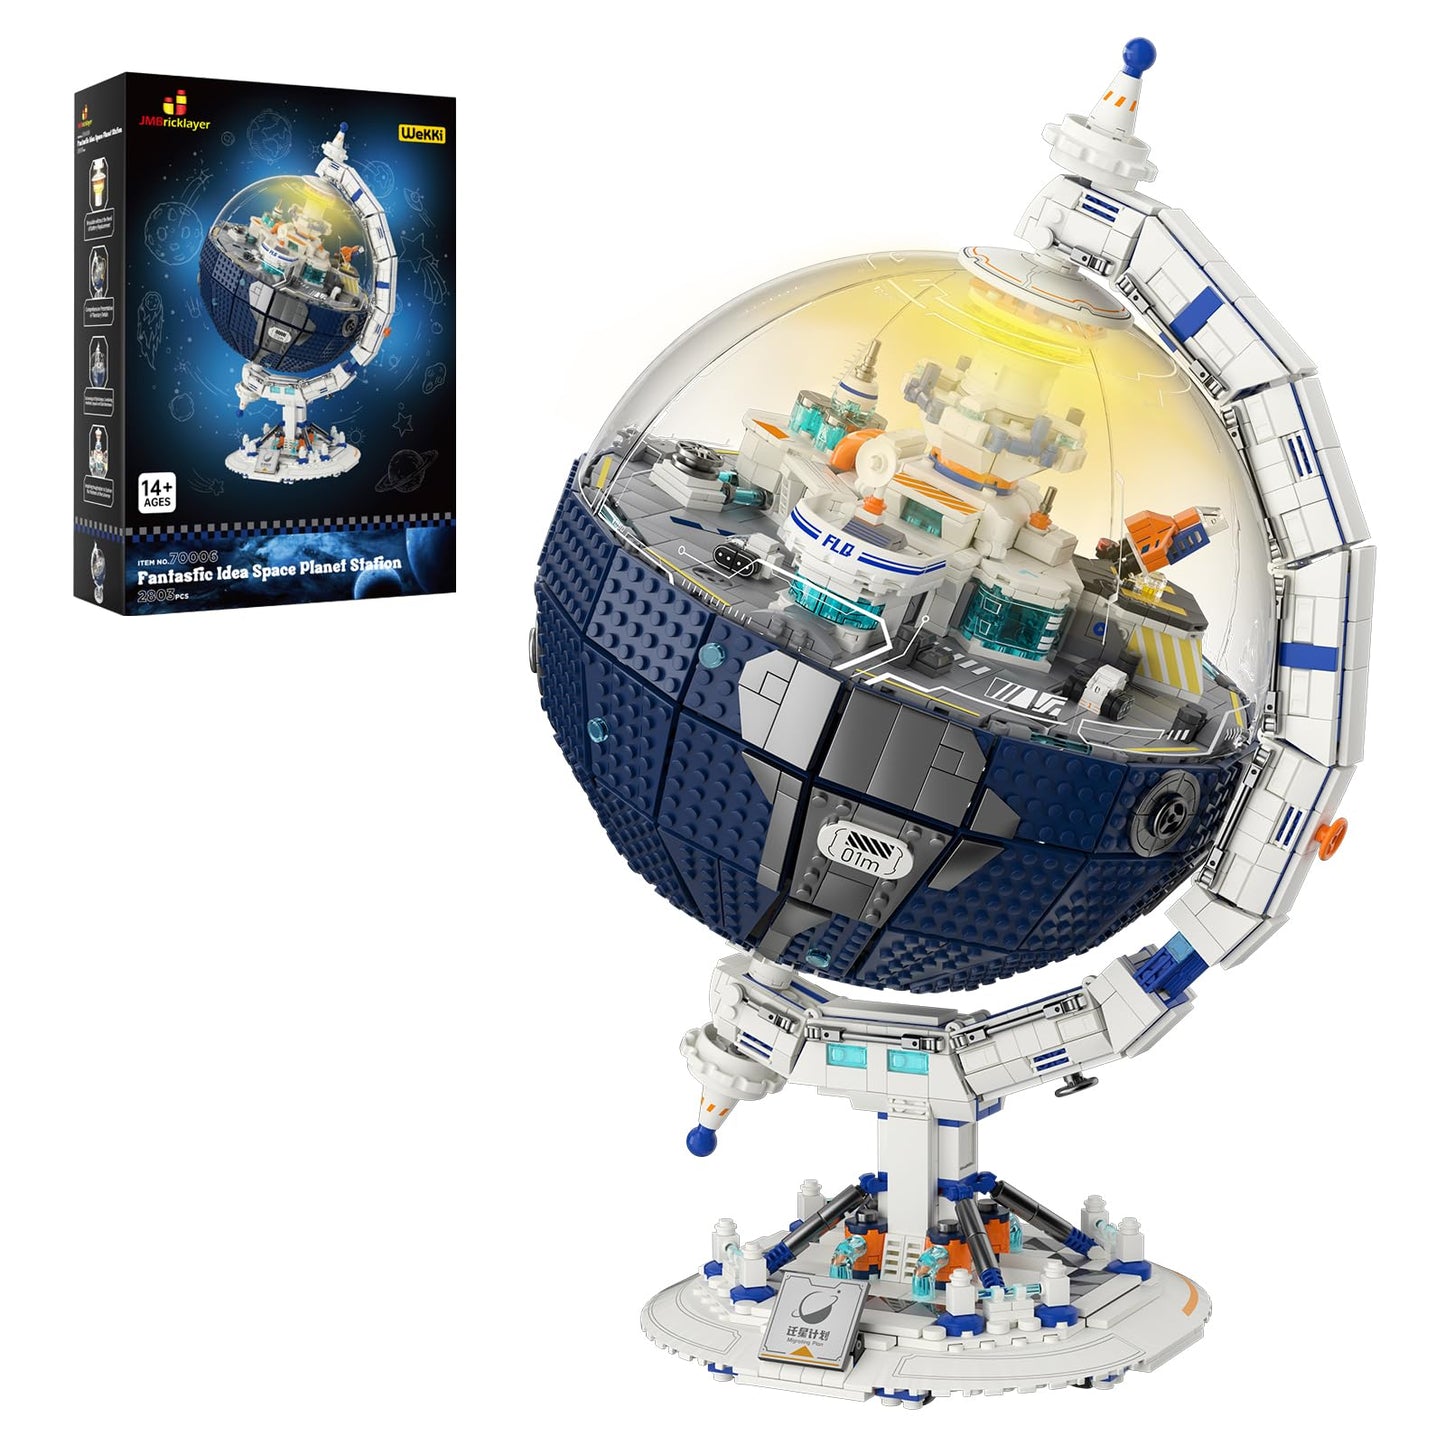 JMBricklayer Space Planet Immigration Station Building Blocks Kits for Adults 70006, 360° Rotating Sphere Block with Lights, Collectible World Globe Model, Gift Idea for Collectors Kids and Space Fans